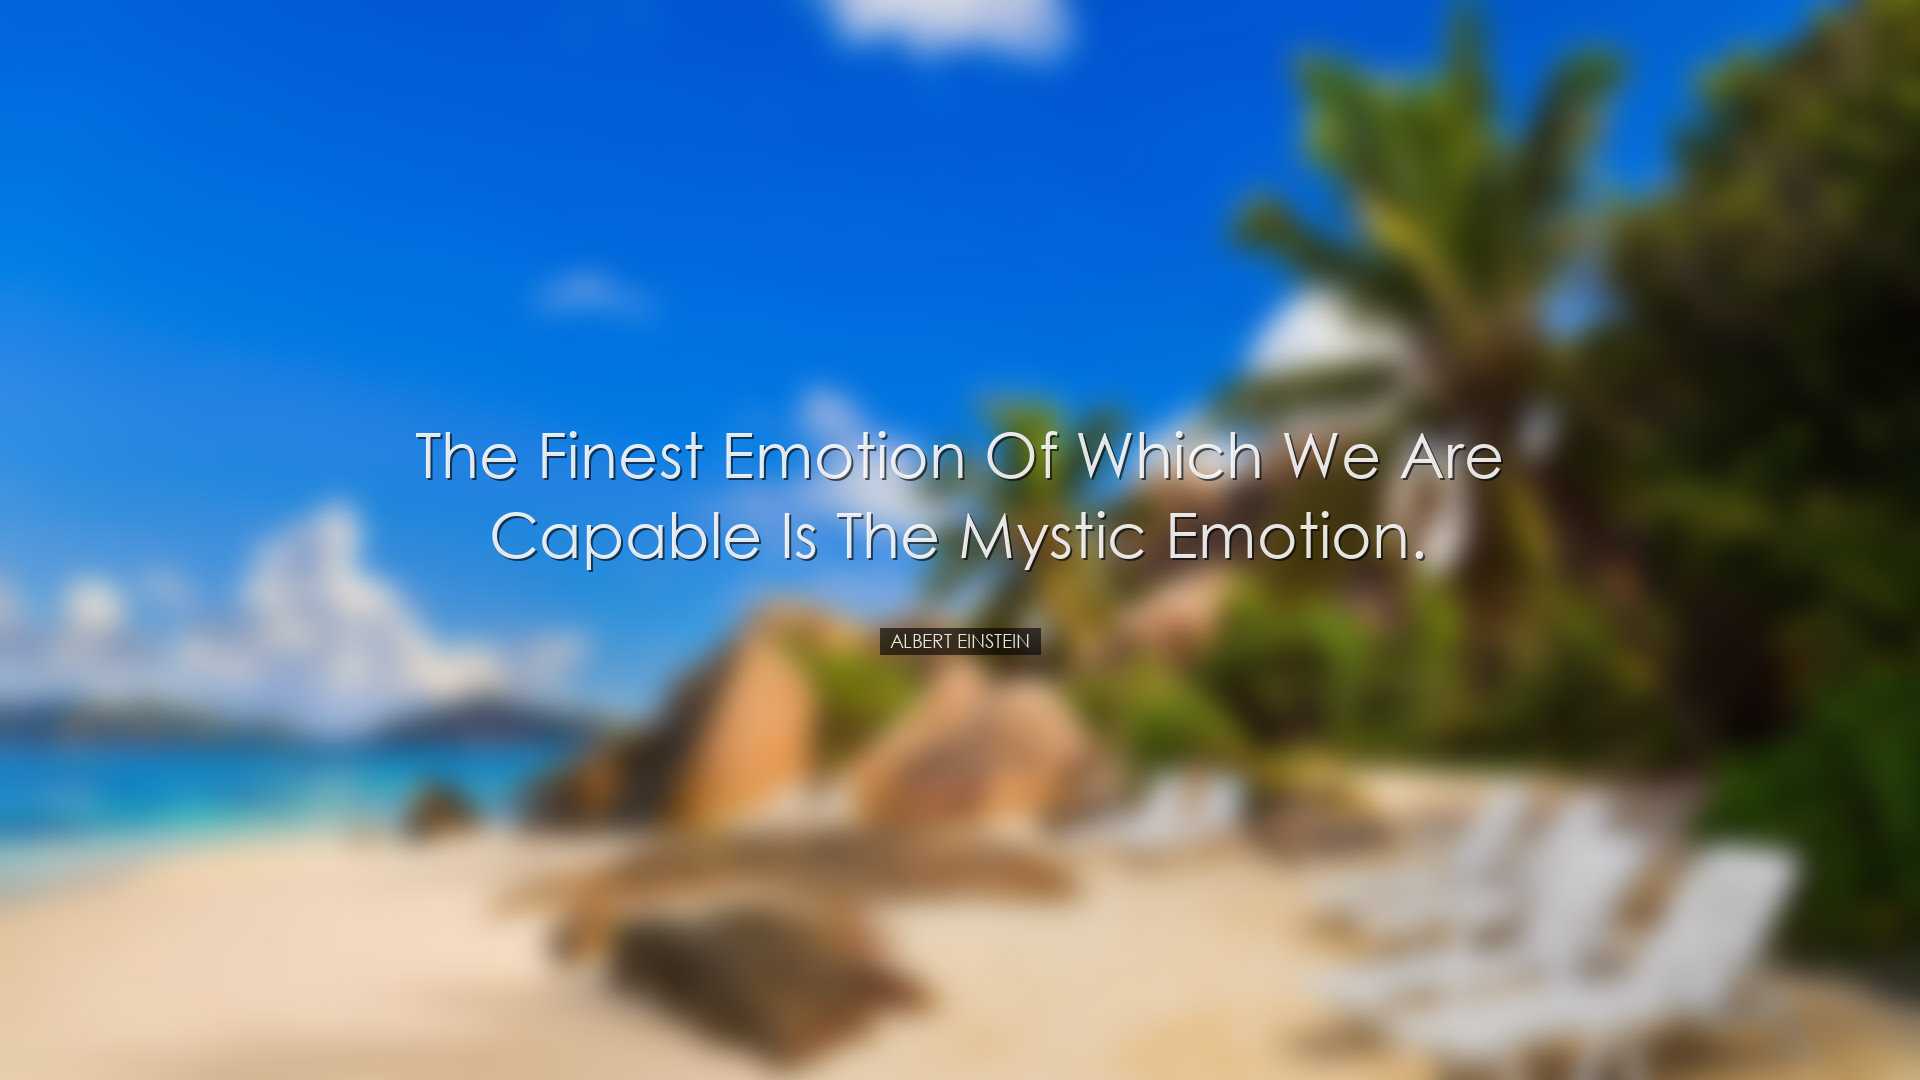 The finest emotion of which we are capable is the mystic emotion.